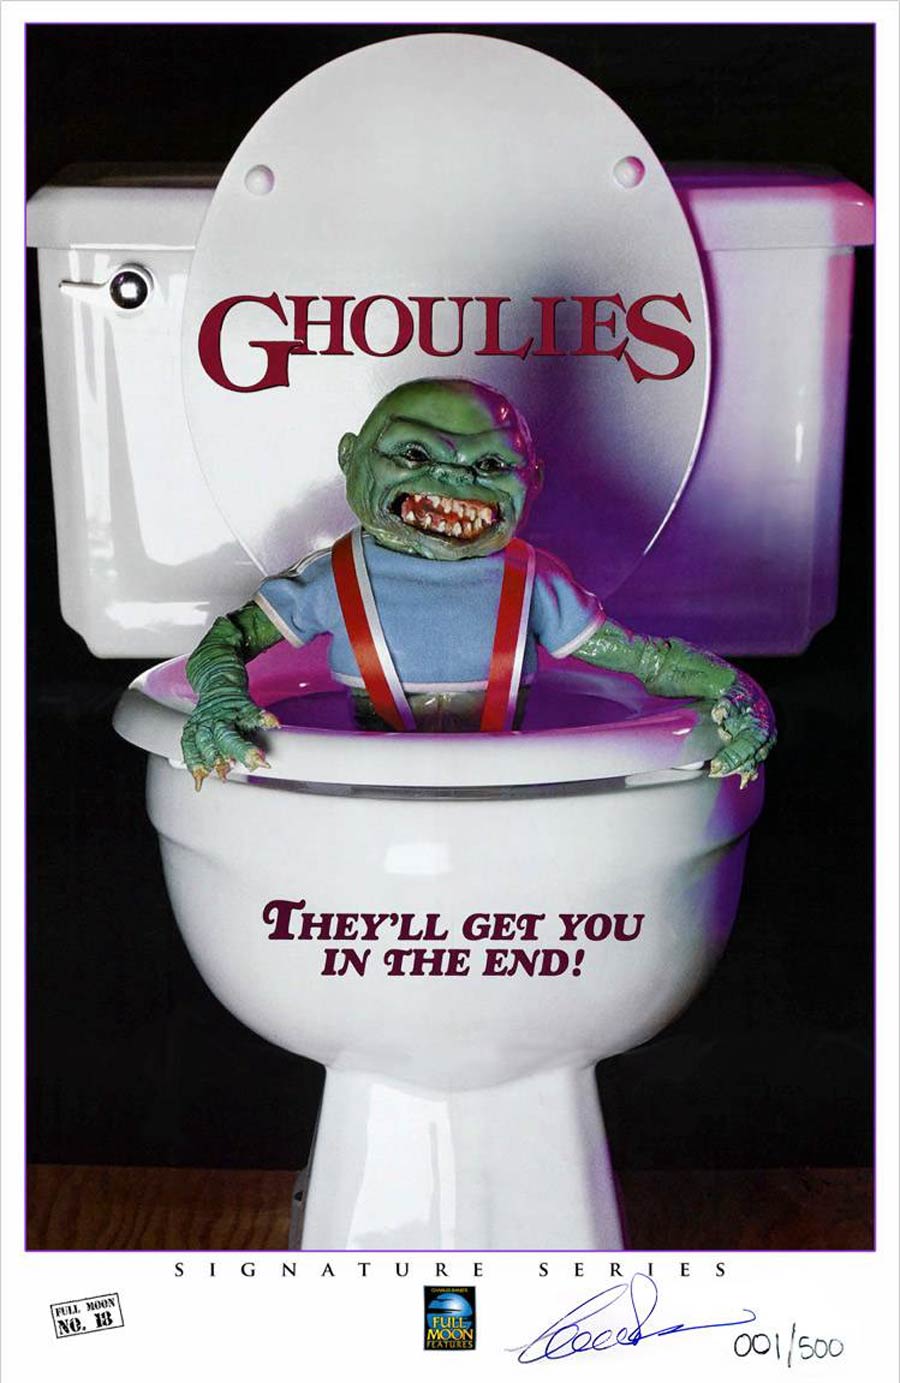 Signature Series Poster - Ghoulies